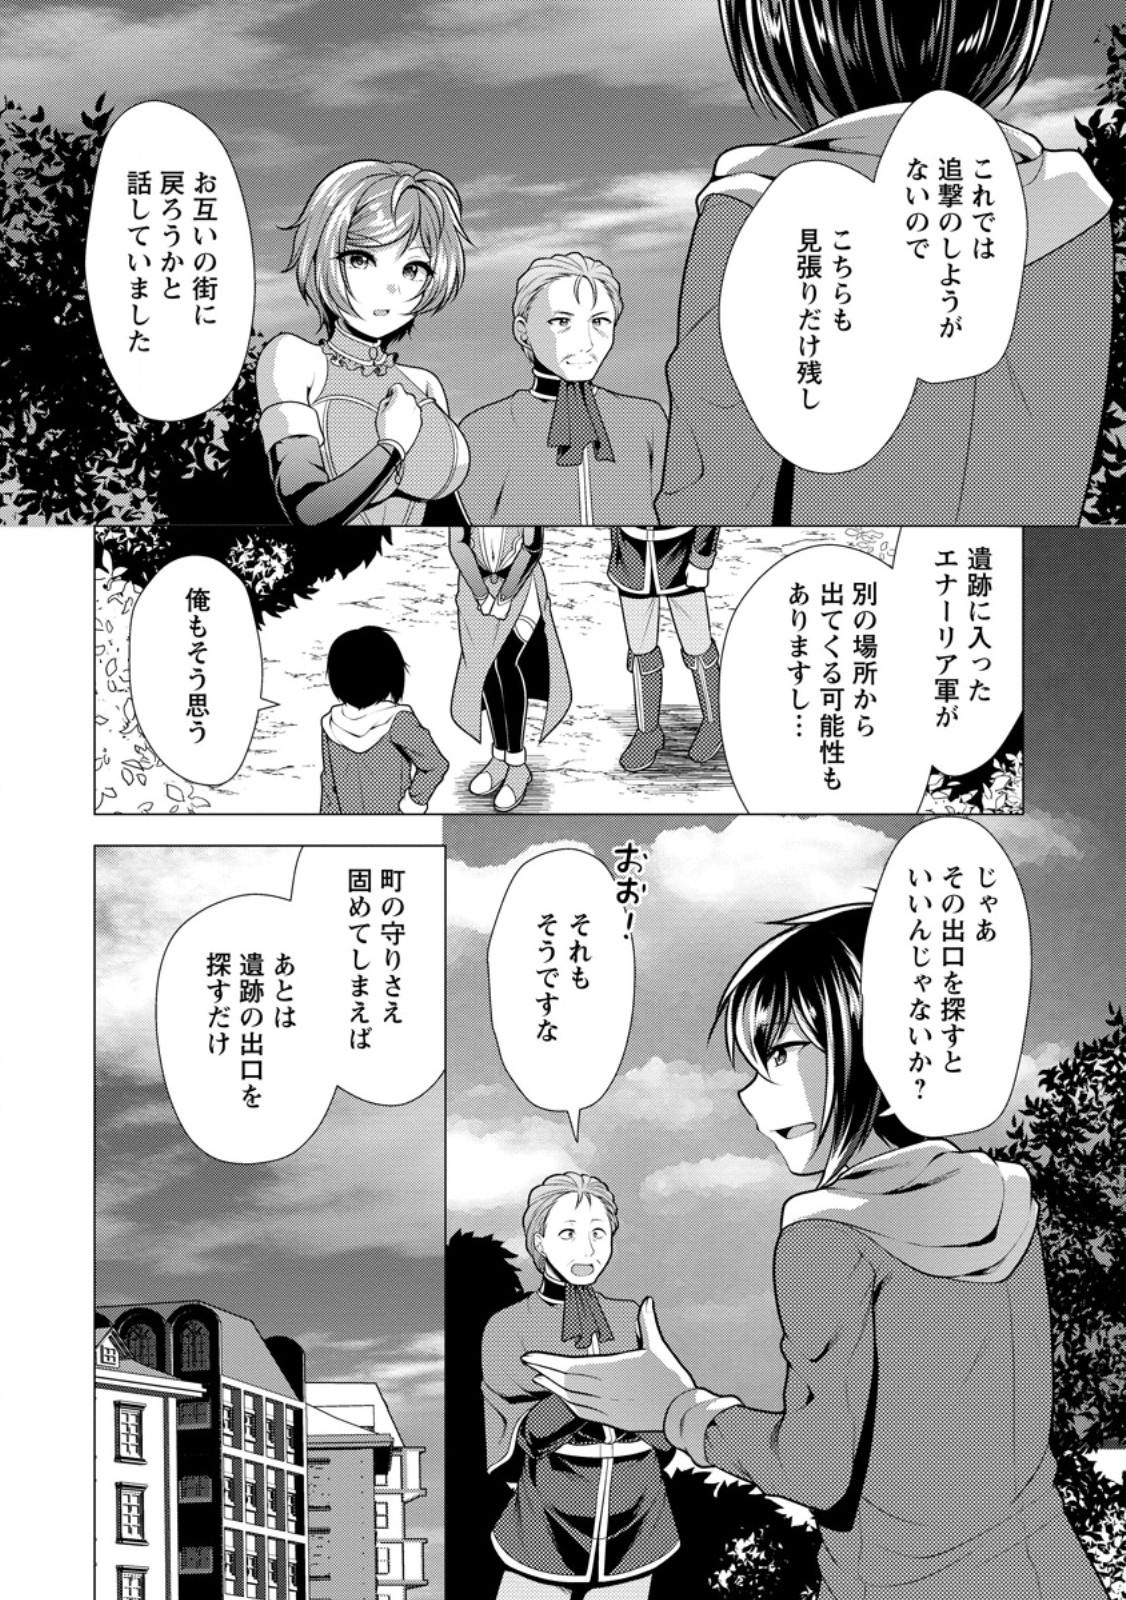 Hisshou Dungeon Unei Houhou - Chapter 59.2 - Page 2